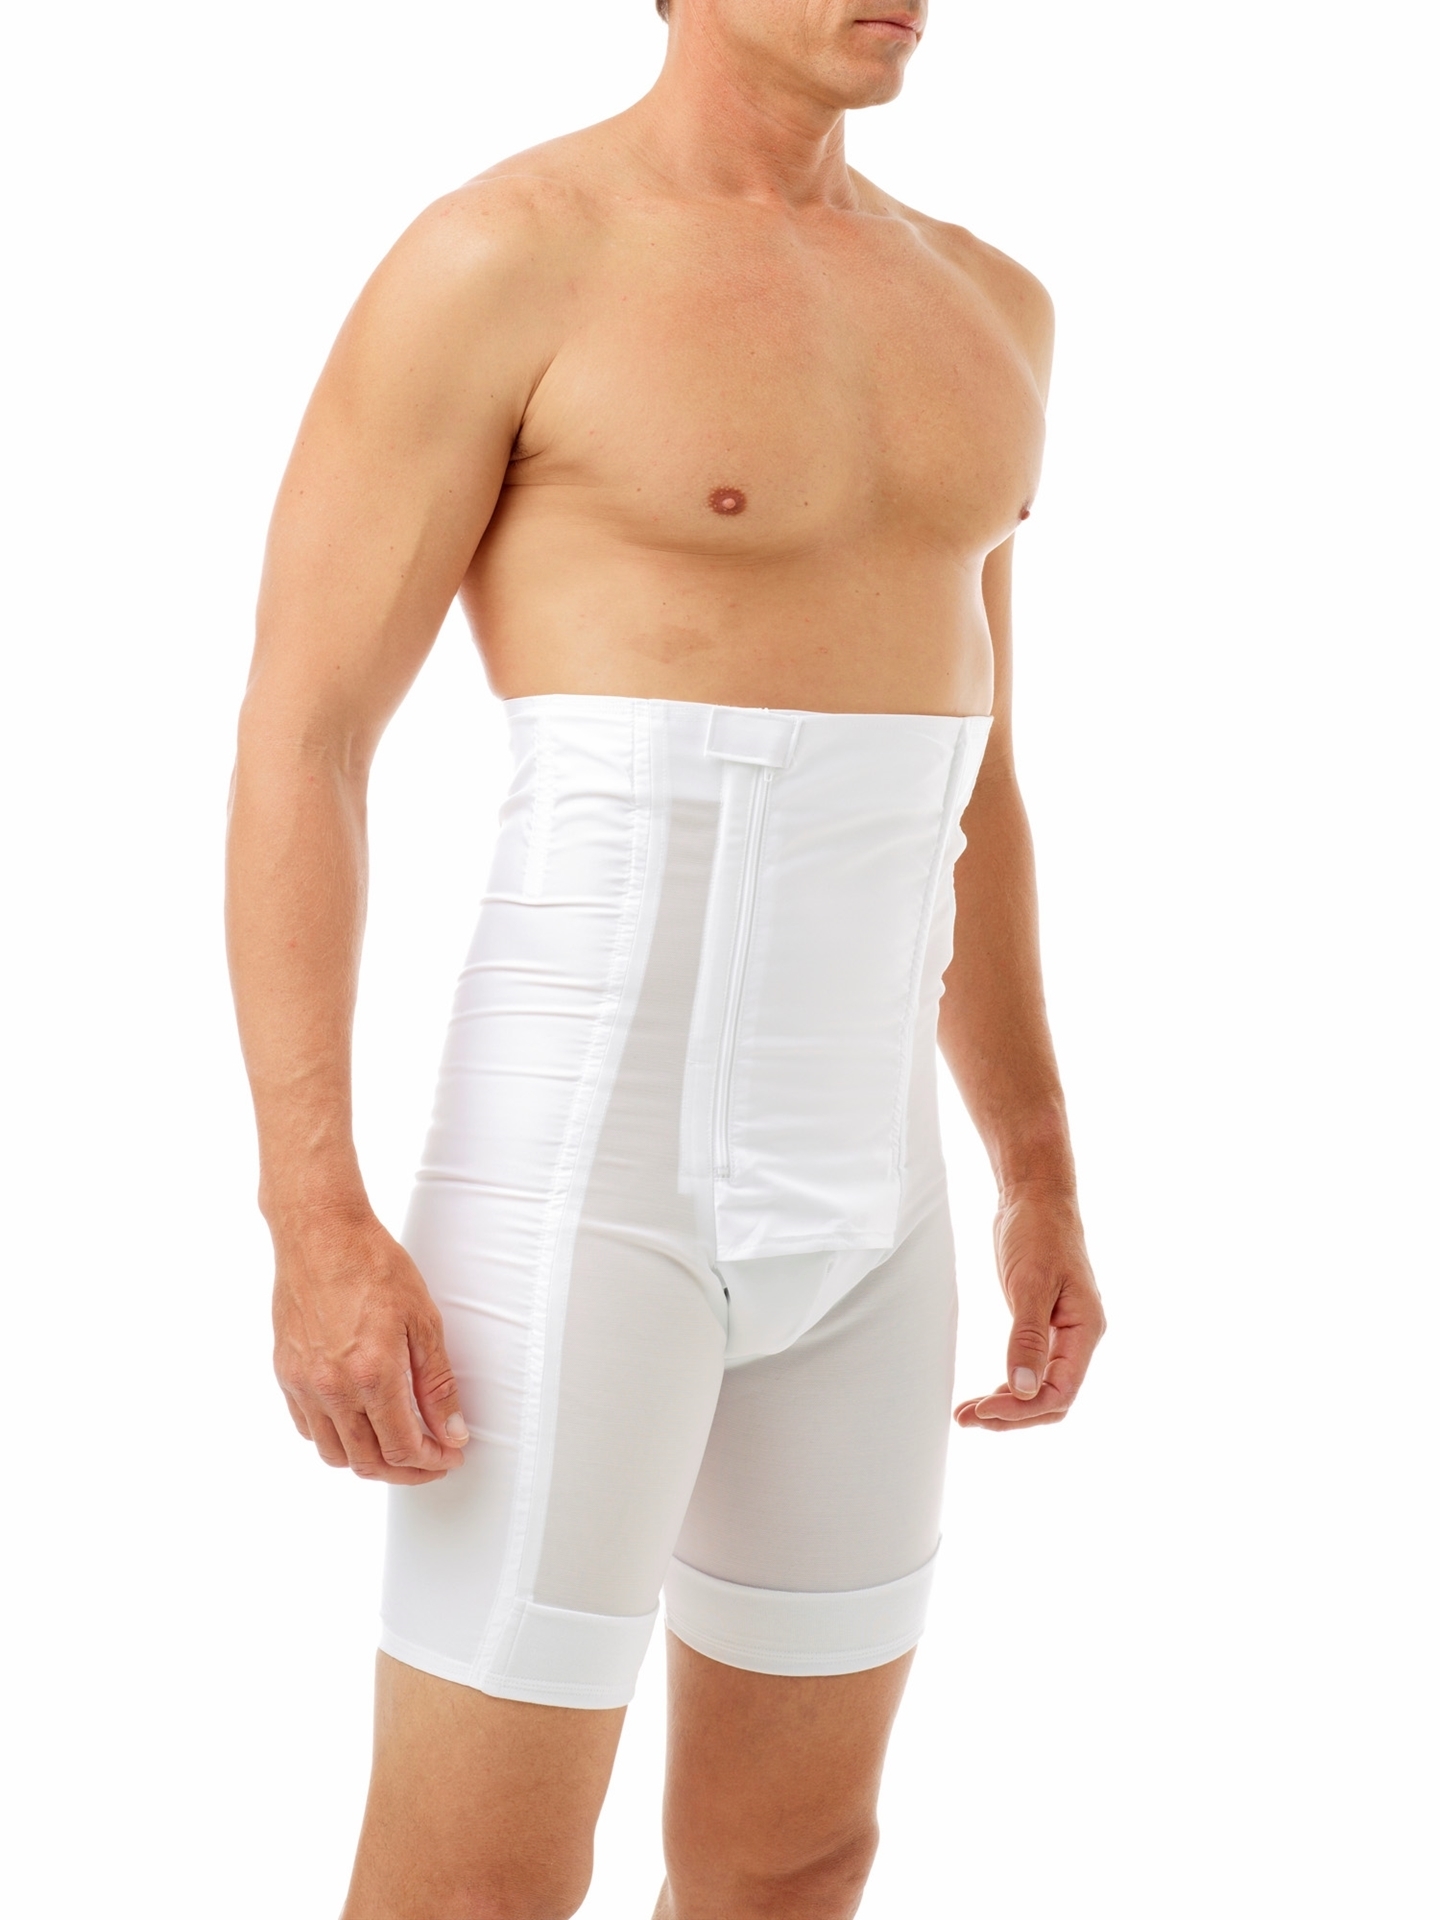 Men's Girdle Compression Shorts  Body Girdle After Surgery - The